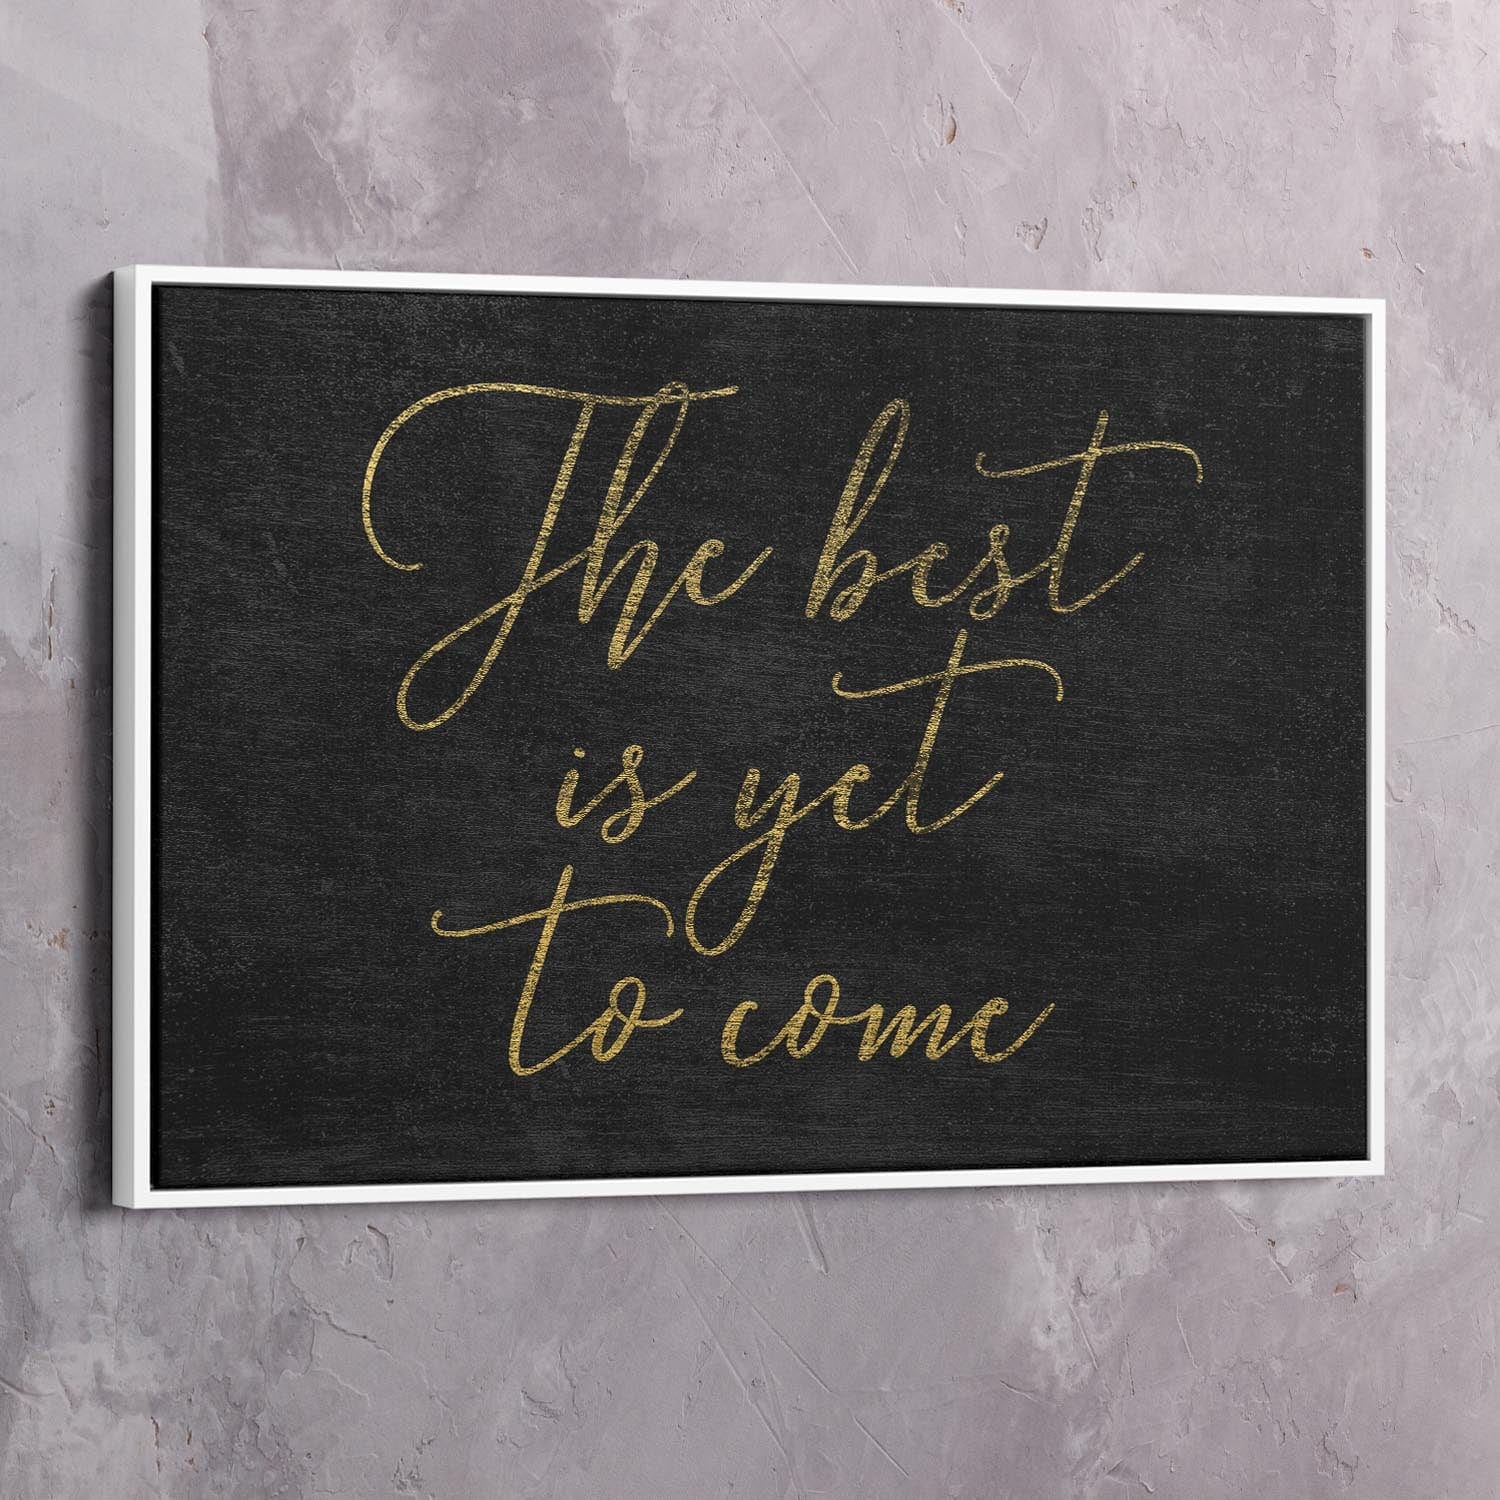 The Best Is Yet To Come Wall Art | Inspirational Wall Art Motivational Wall Art Quotes Office Art | ImpaktMaker Exclusive Canvas Art Landscape